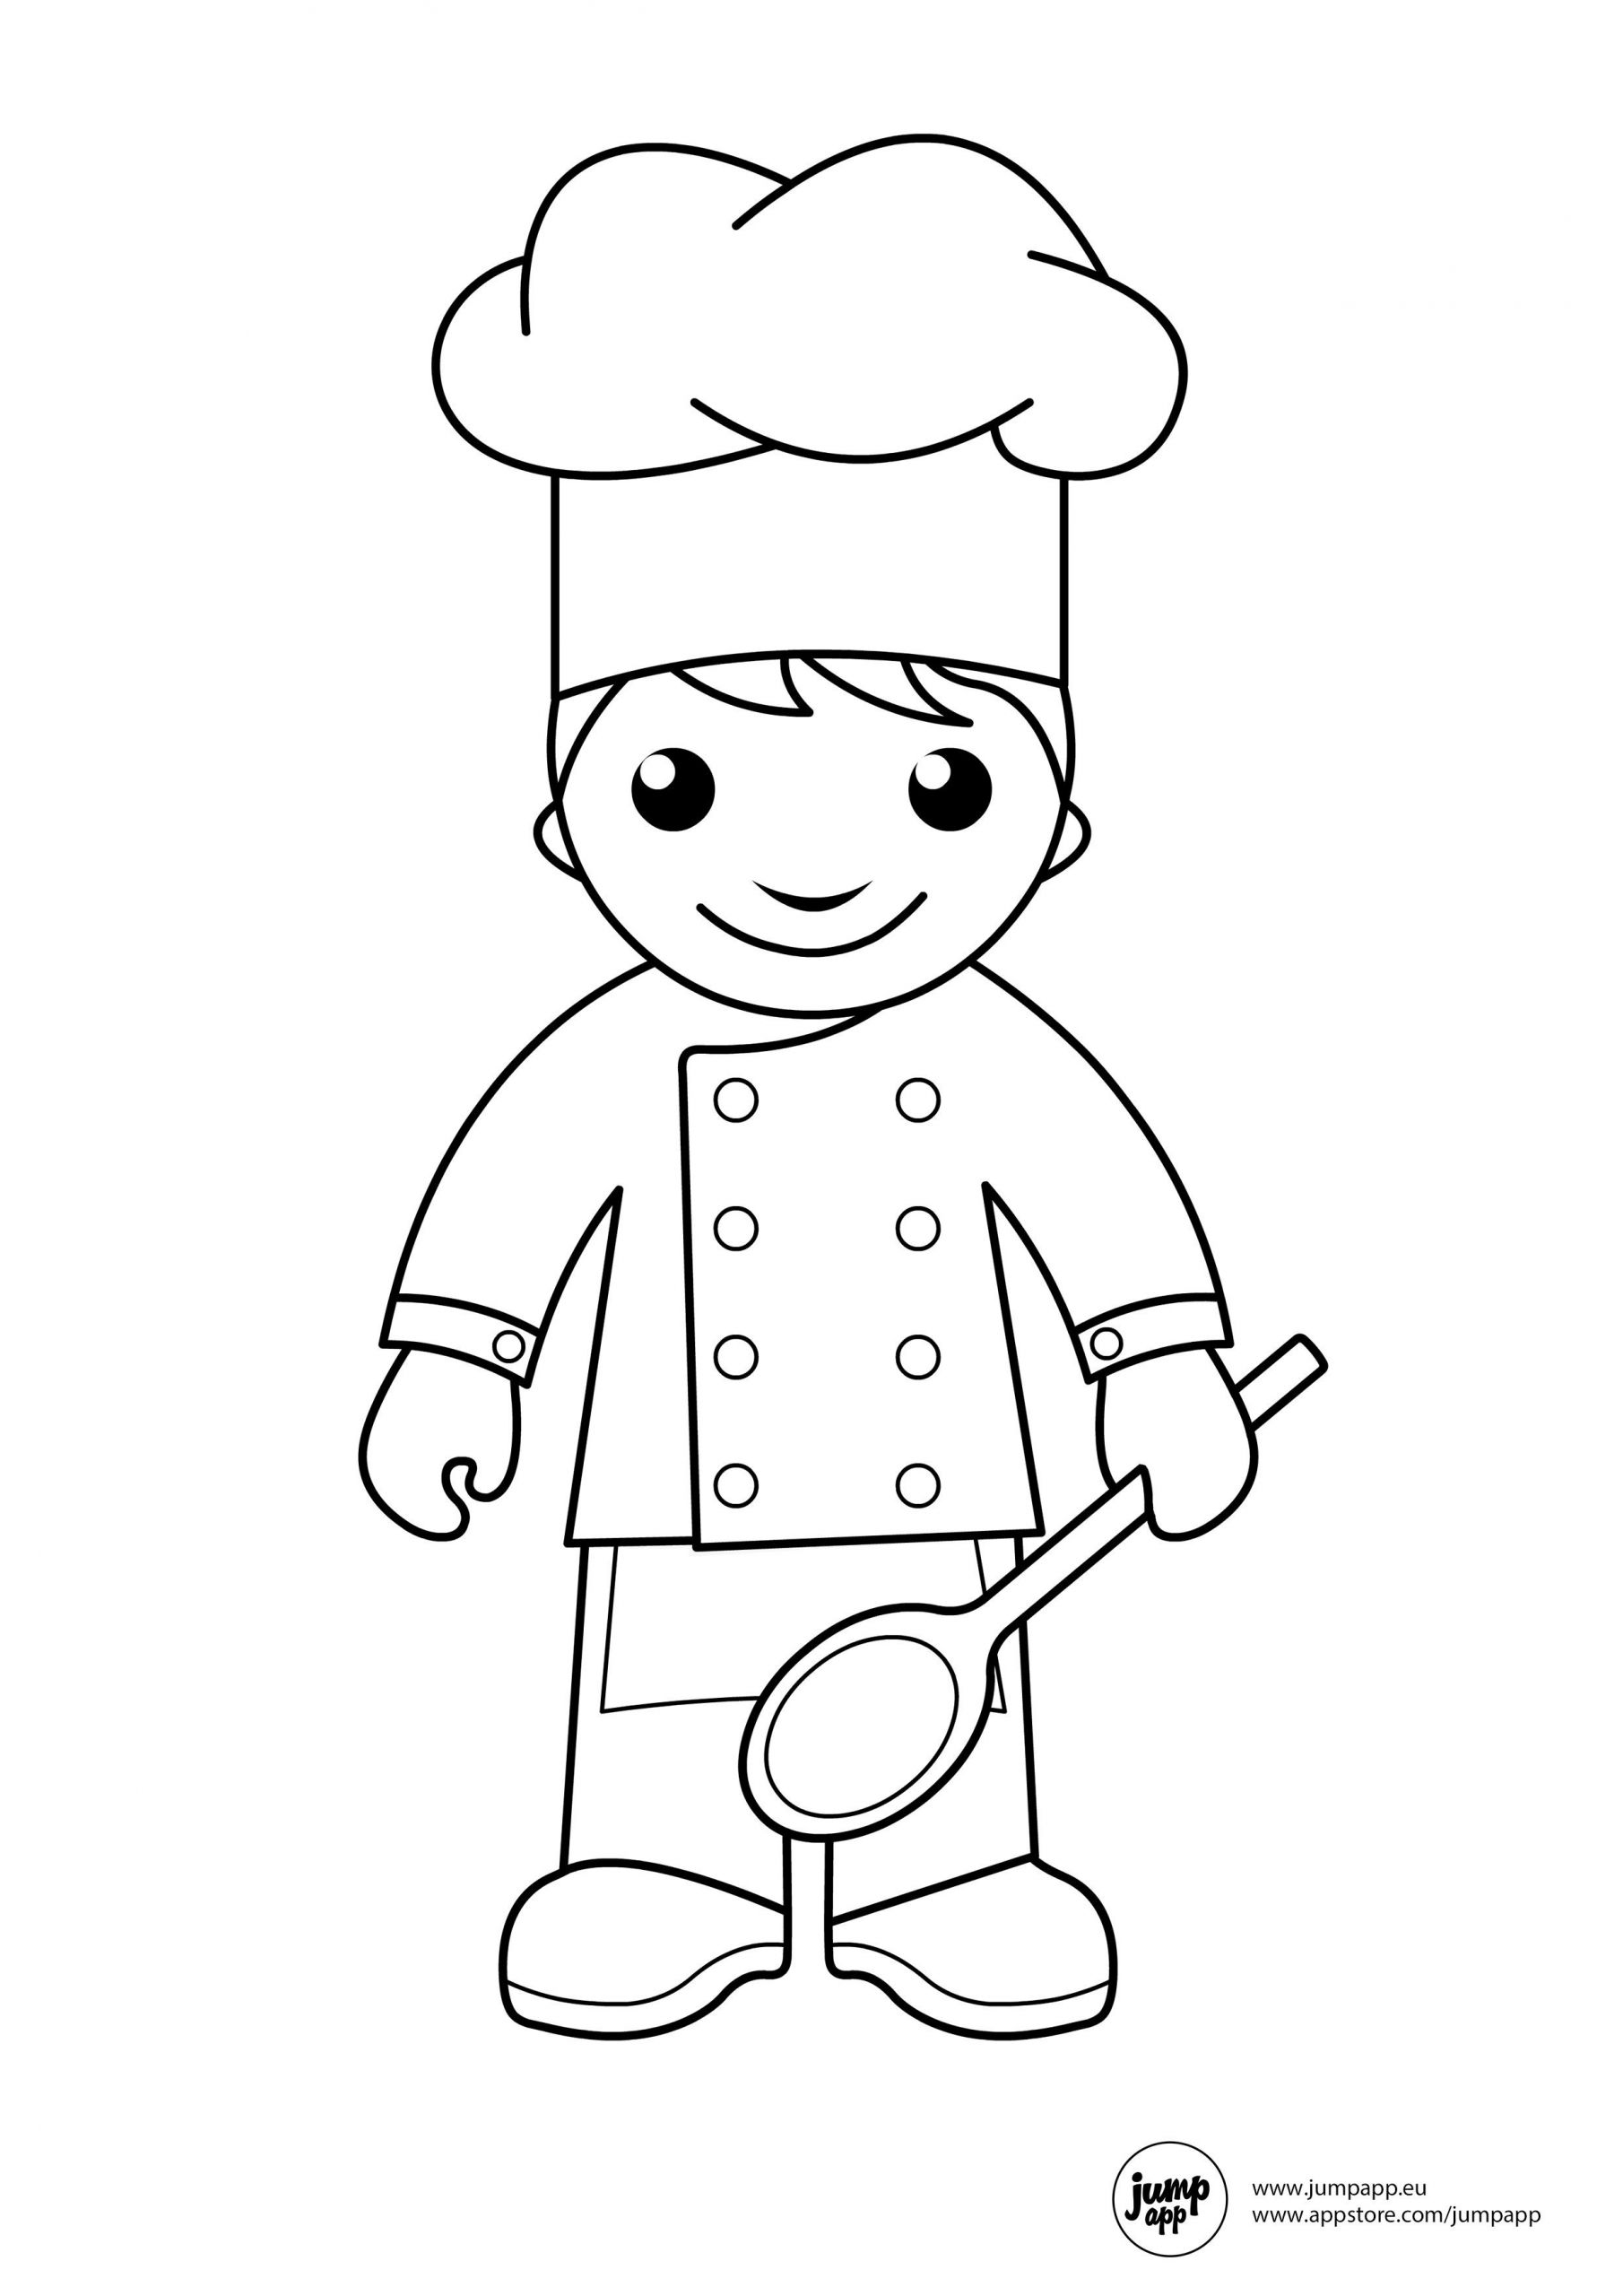 Community Helpers Coloring Pages For Toddlers
 Pin by Jump App on Printable Coloring Pages